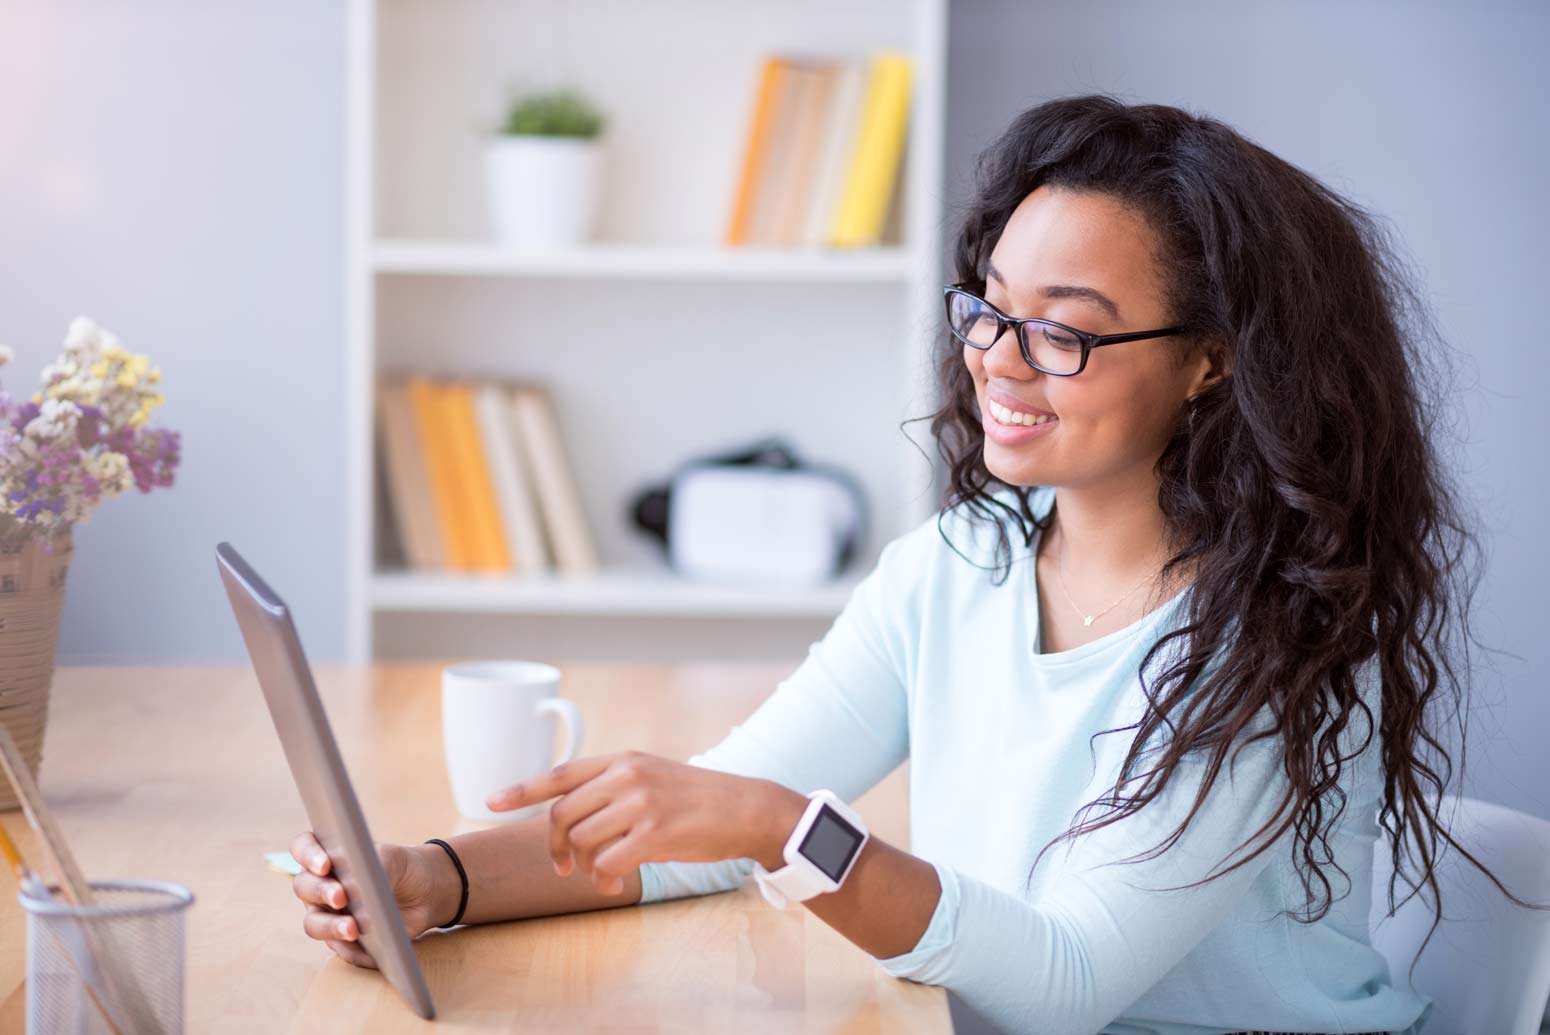 9 of the Best Work From Home Jobs